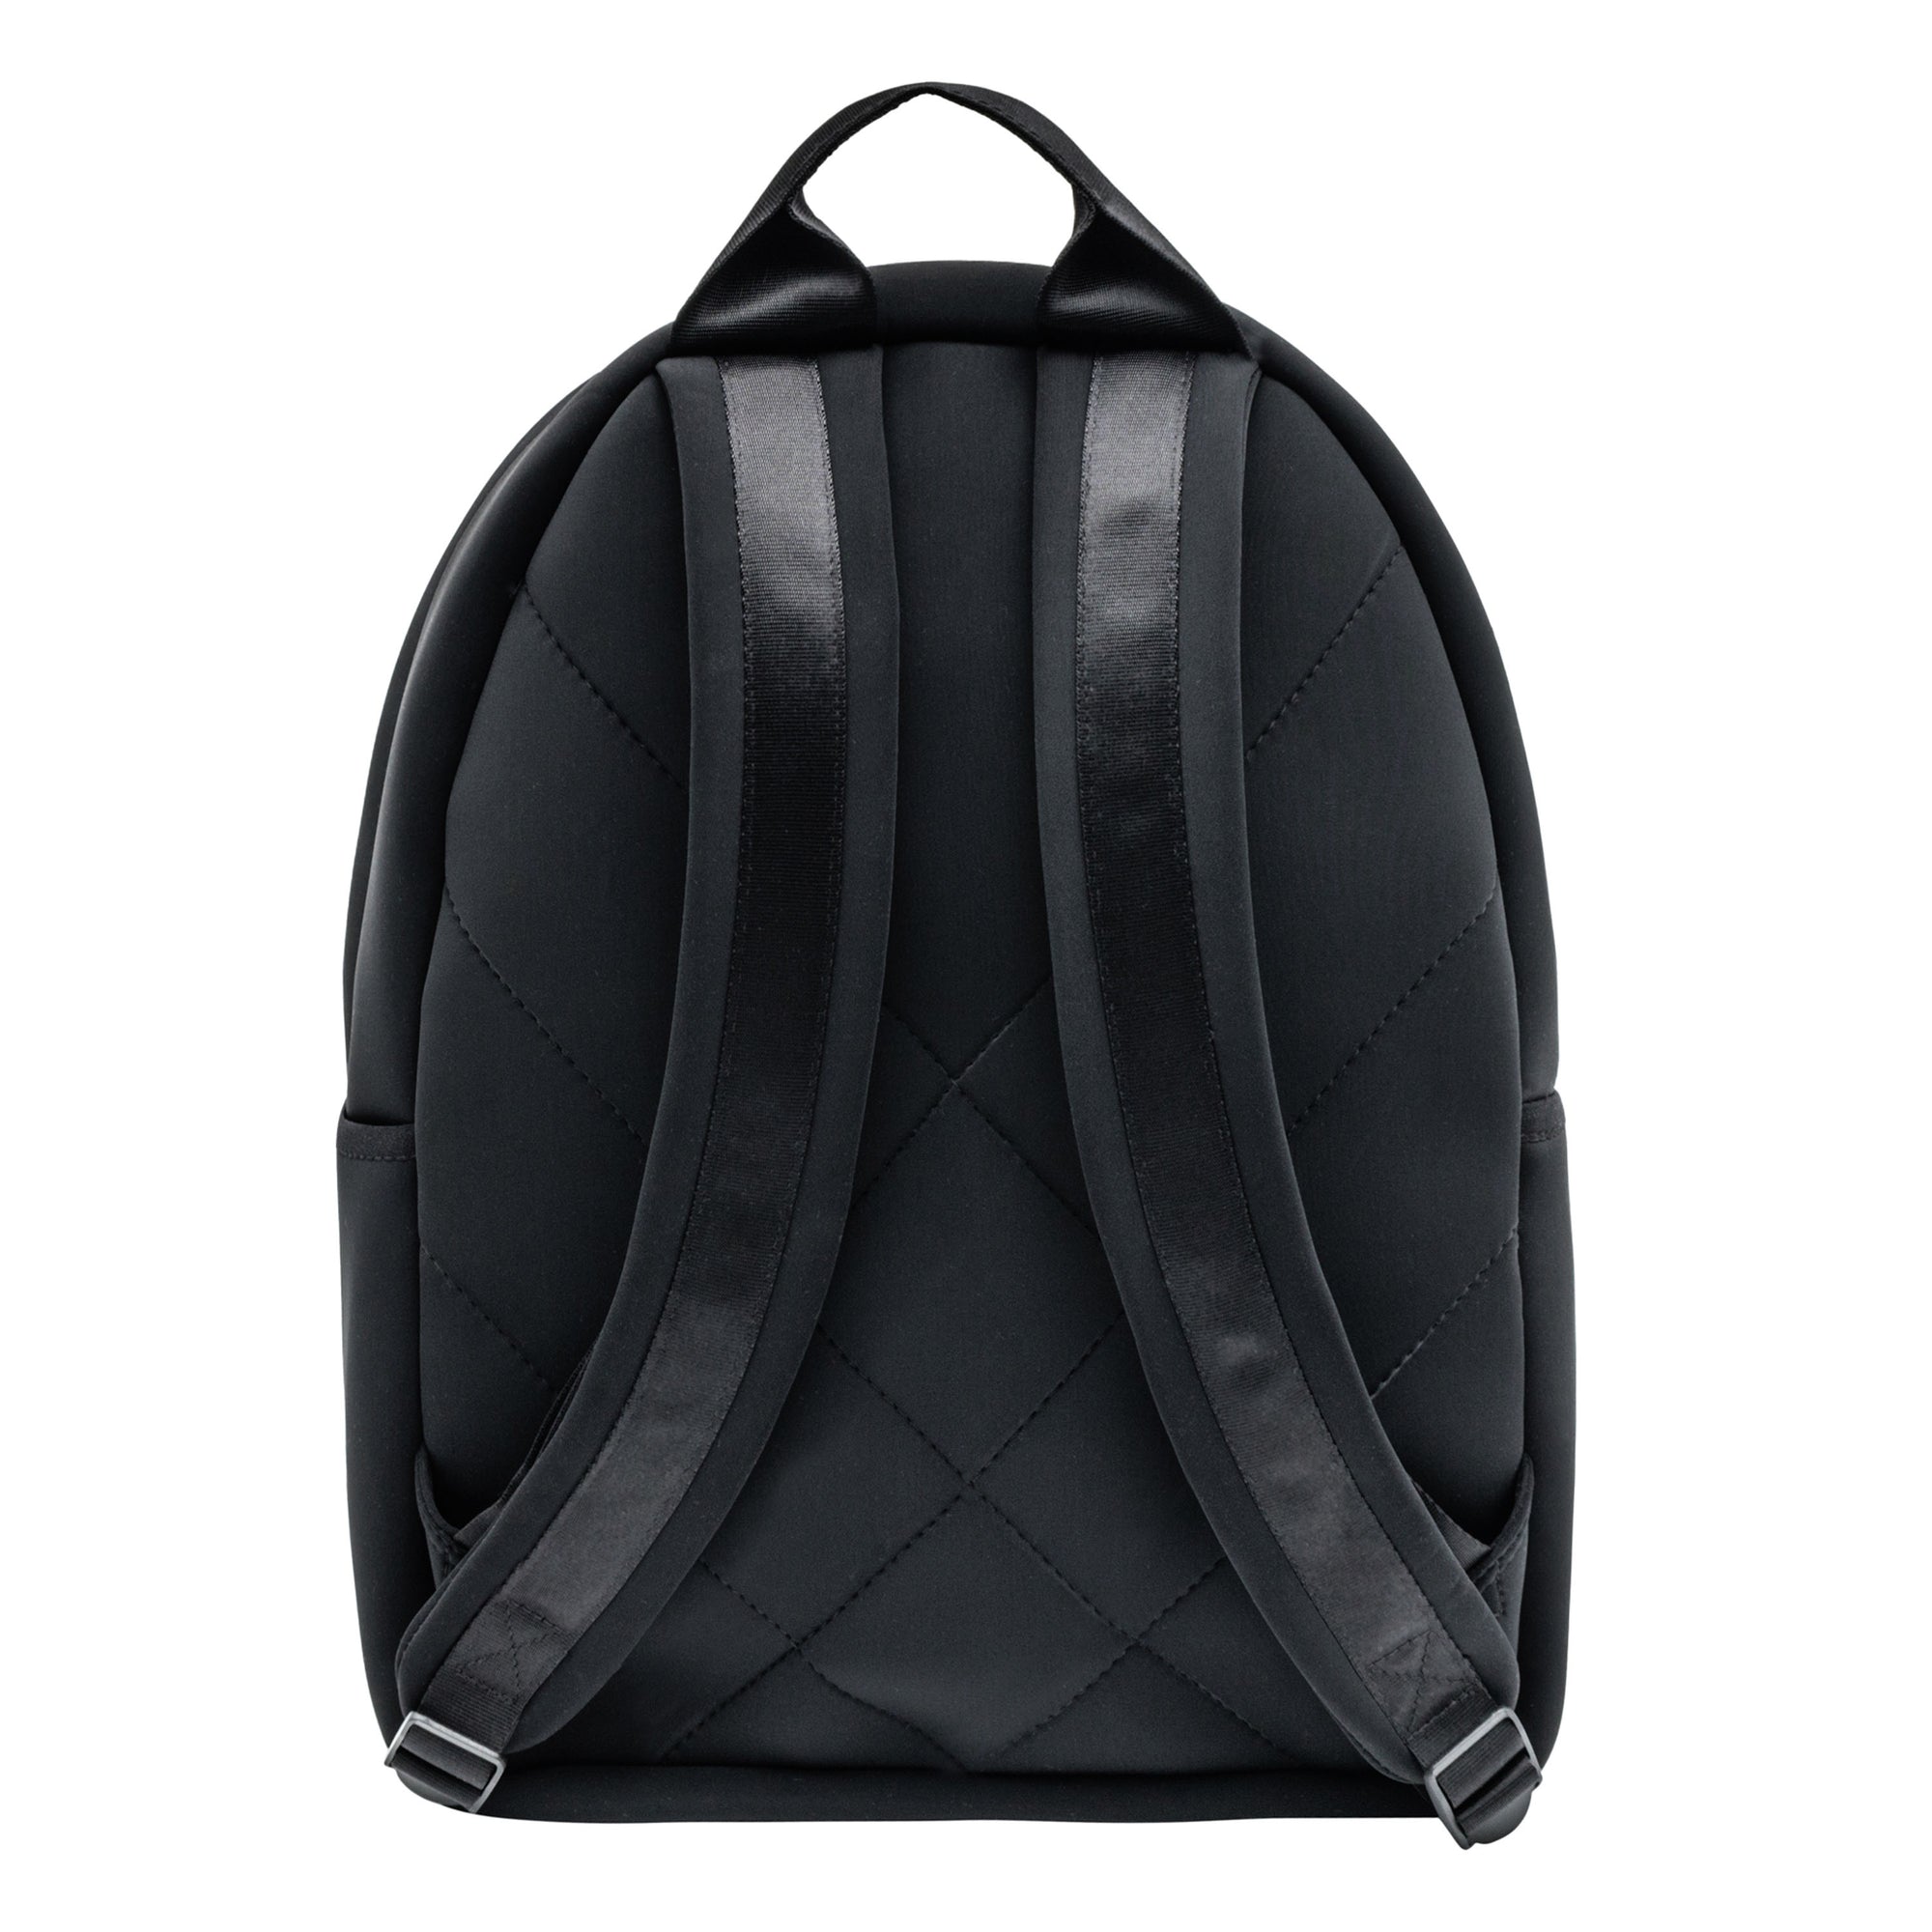  Lacoste - Backpacks / Luggage & Travel Gear: Clothing